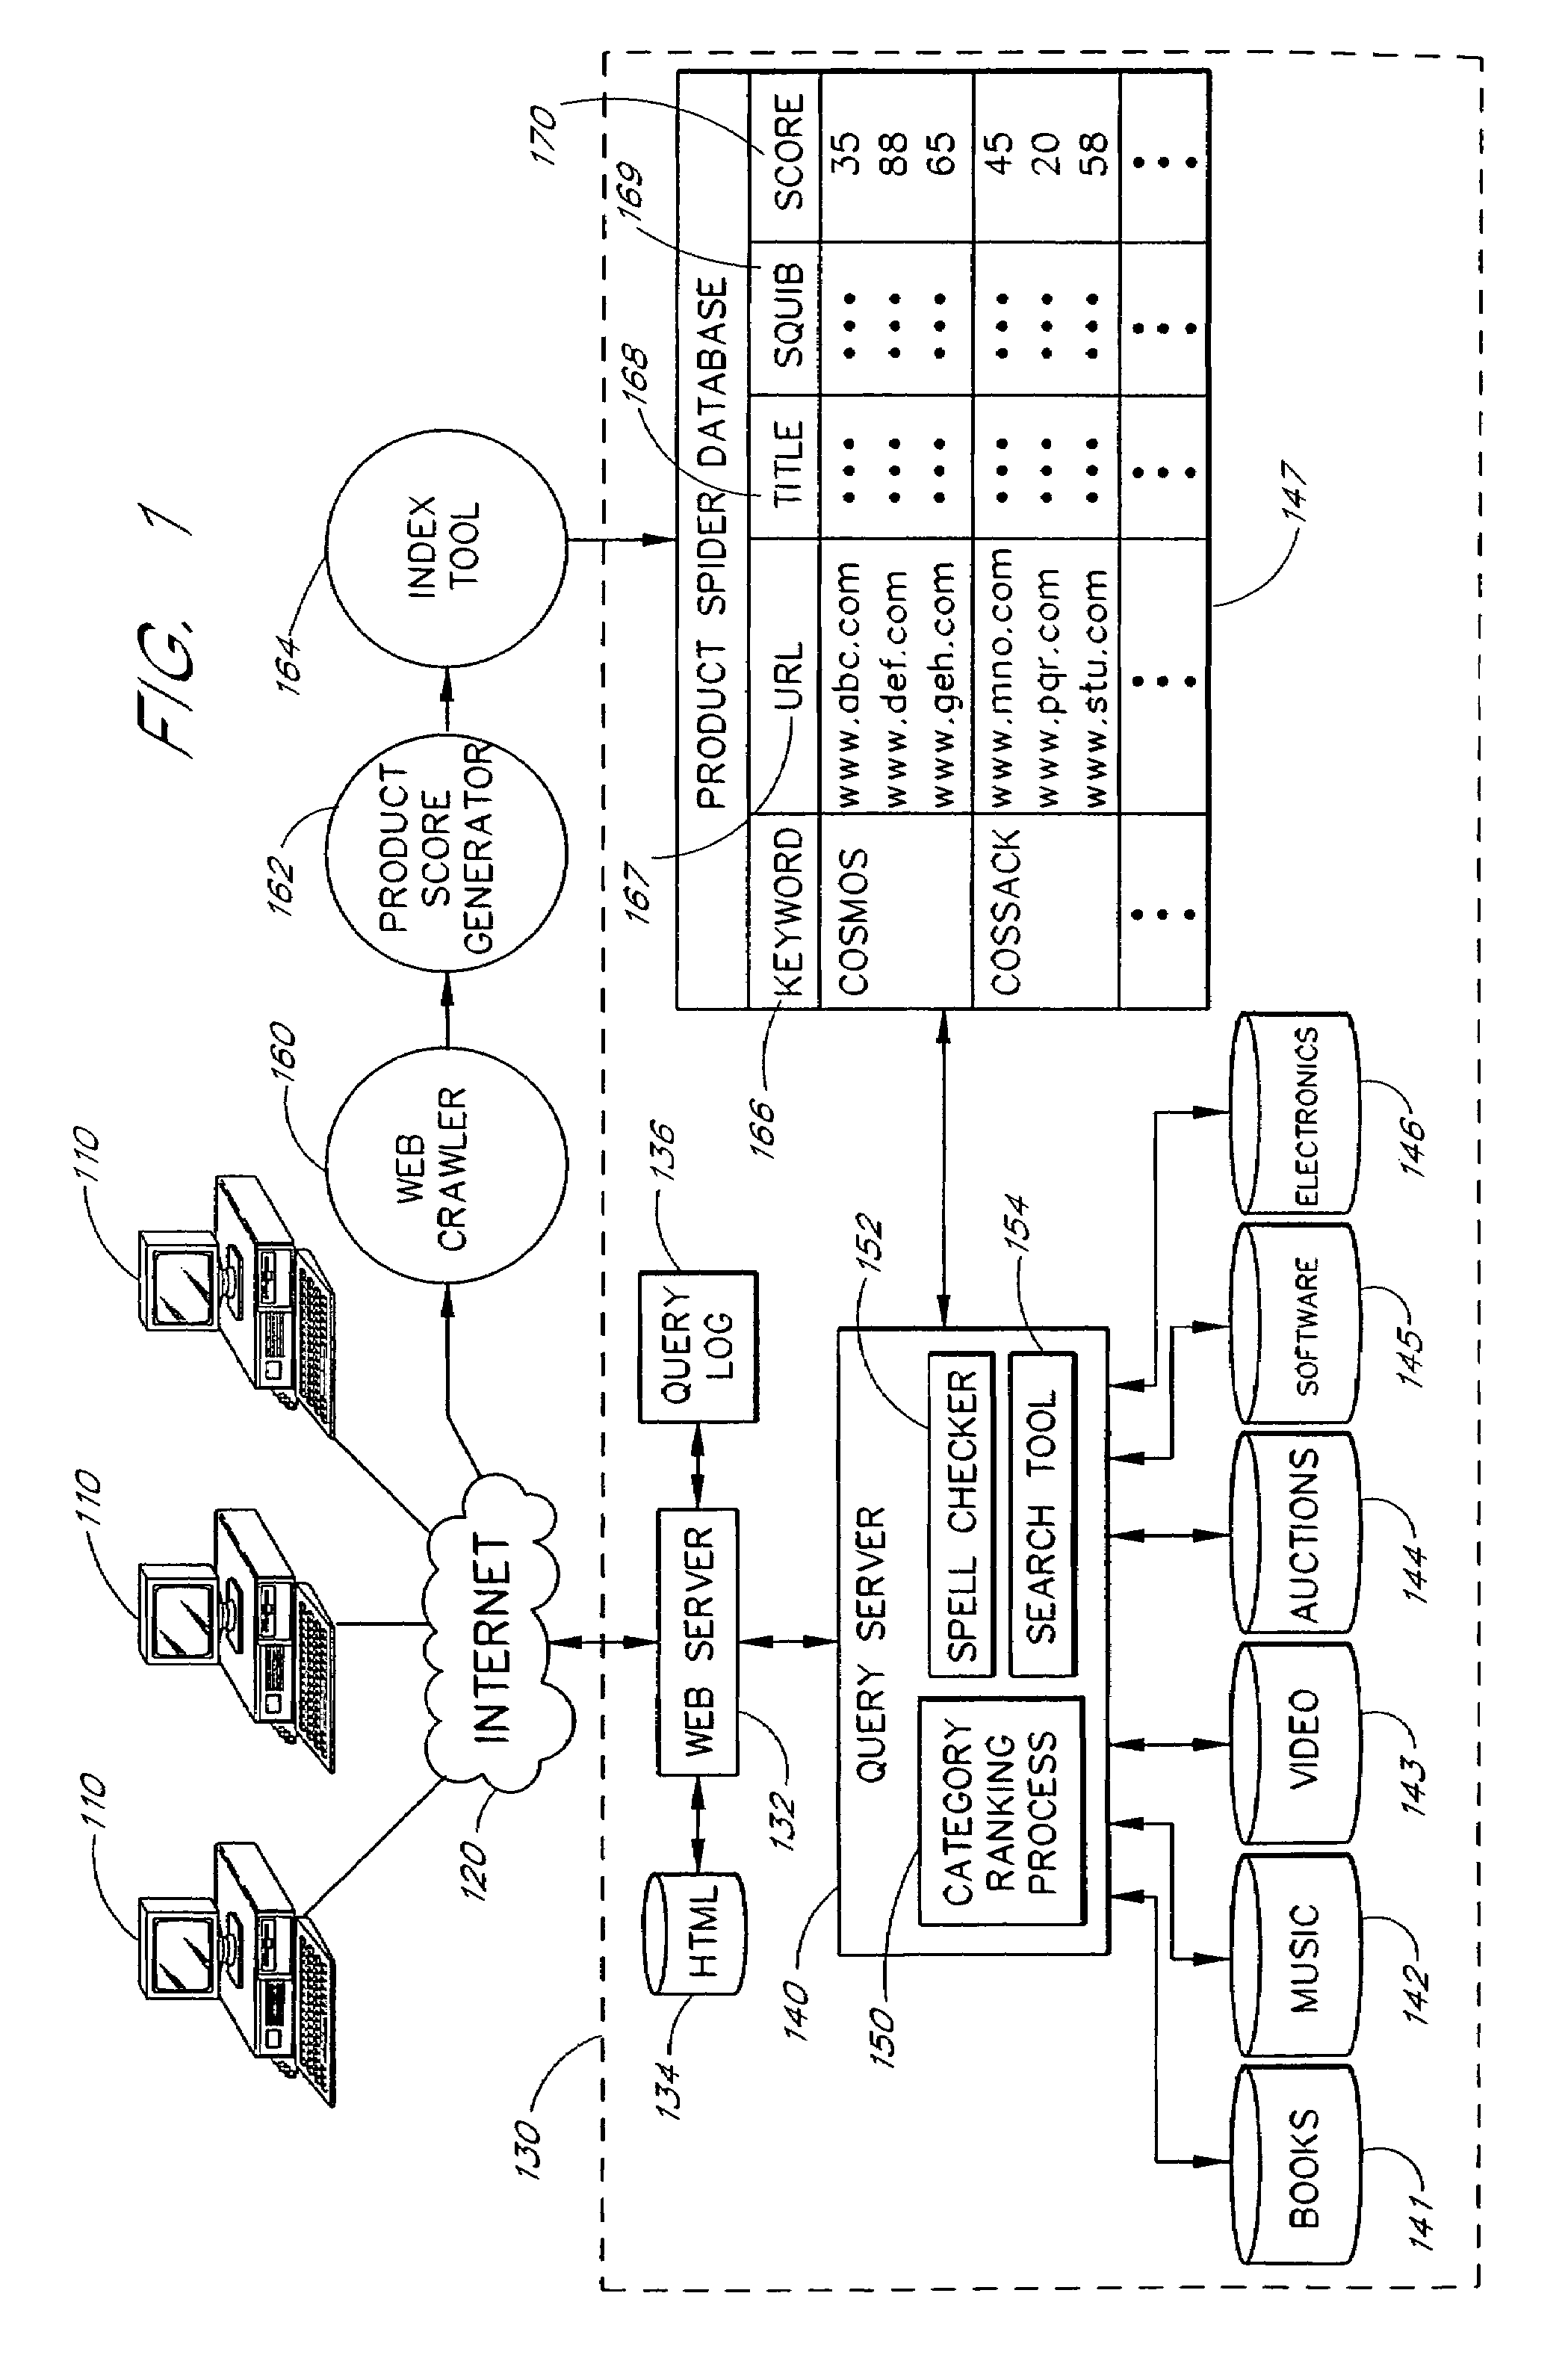 Search engine system and associated content analysis methods for locating web pages with product offerings